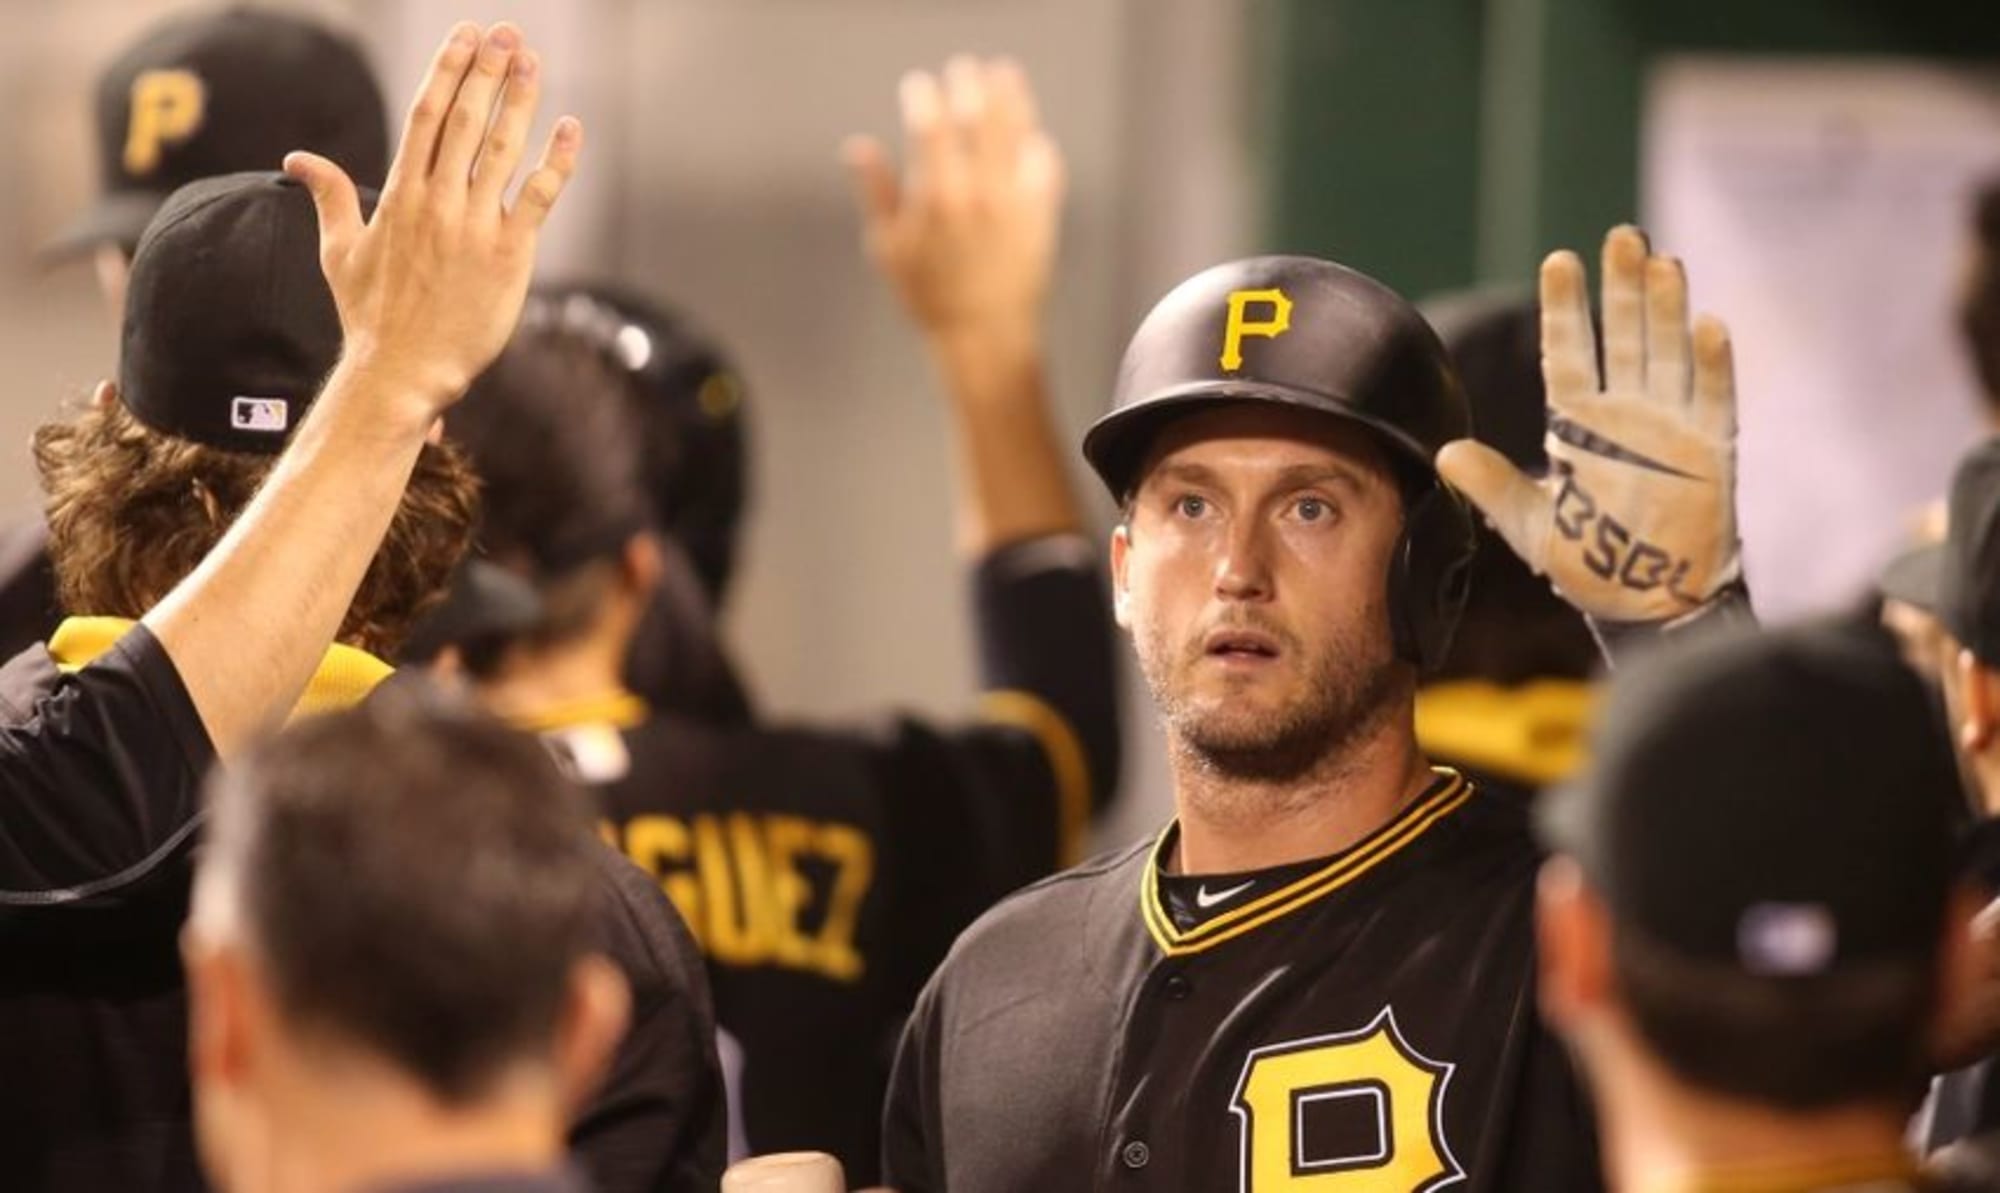 Pittsburgh Pirates Win Five Straight, but End Week with Series Loss